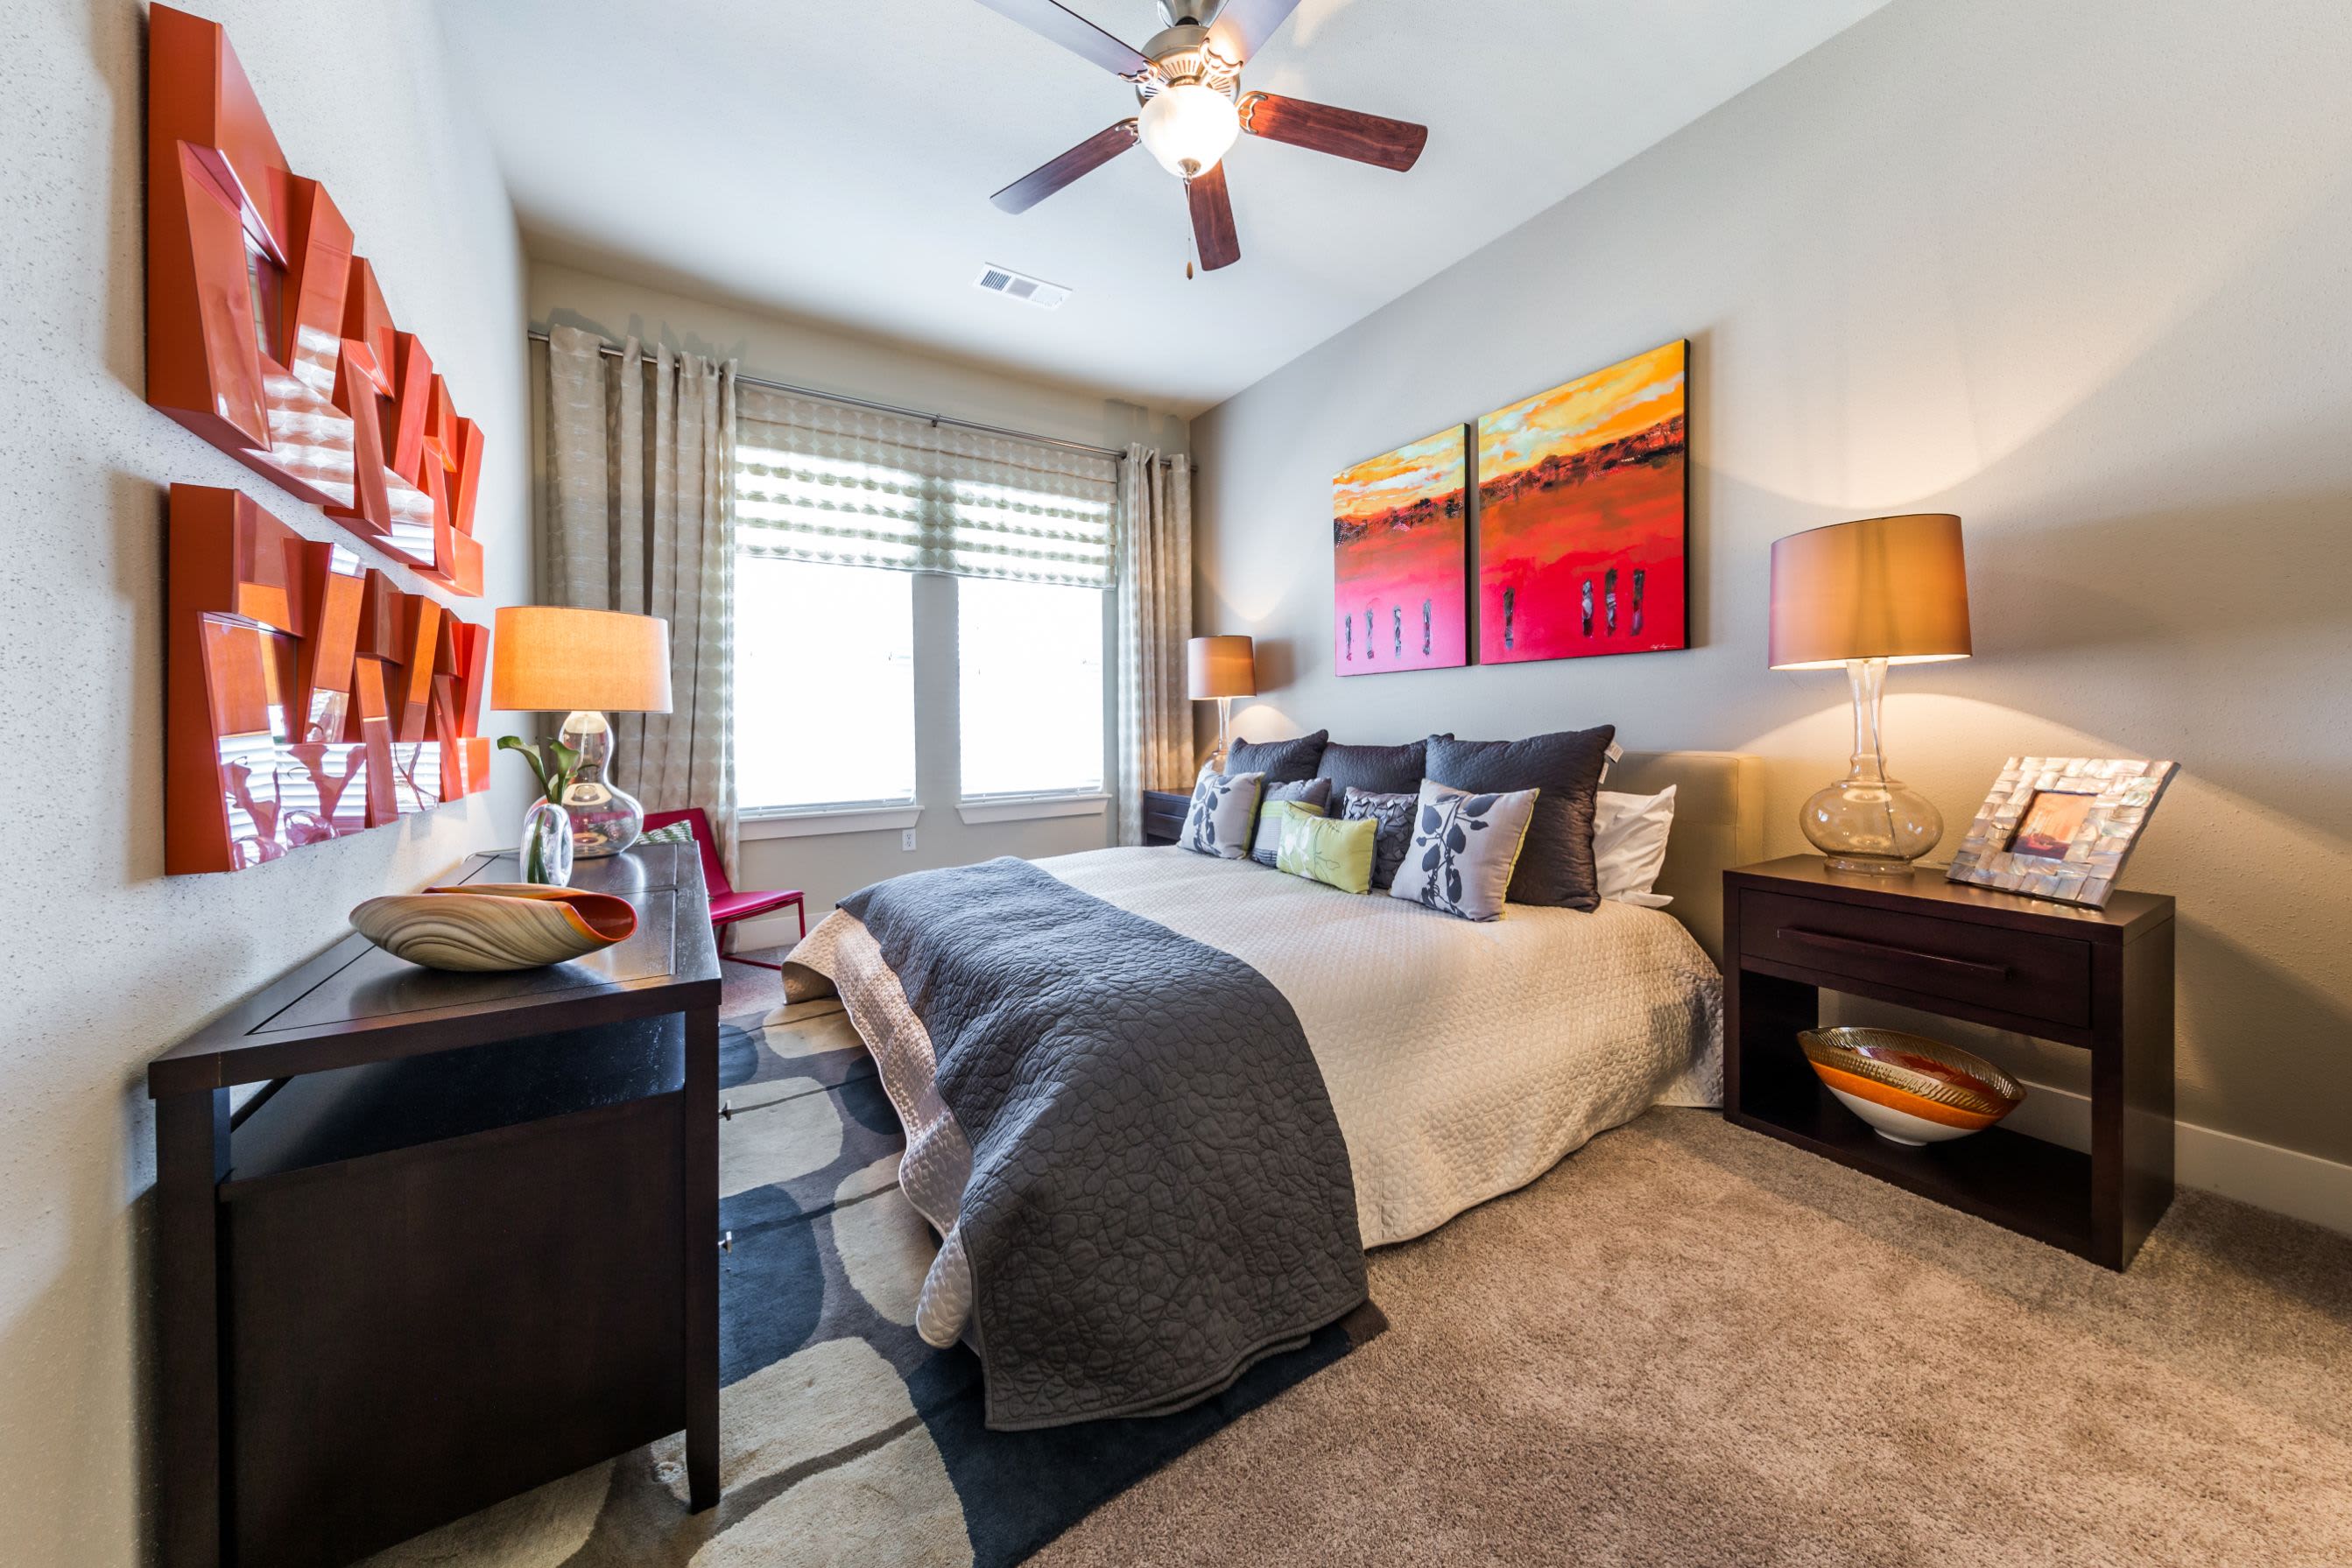 Spacious bedroom with a ceiling fan at The Marq at Ridgegate in Lone Tree, Colorado